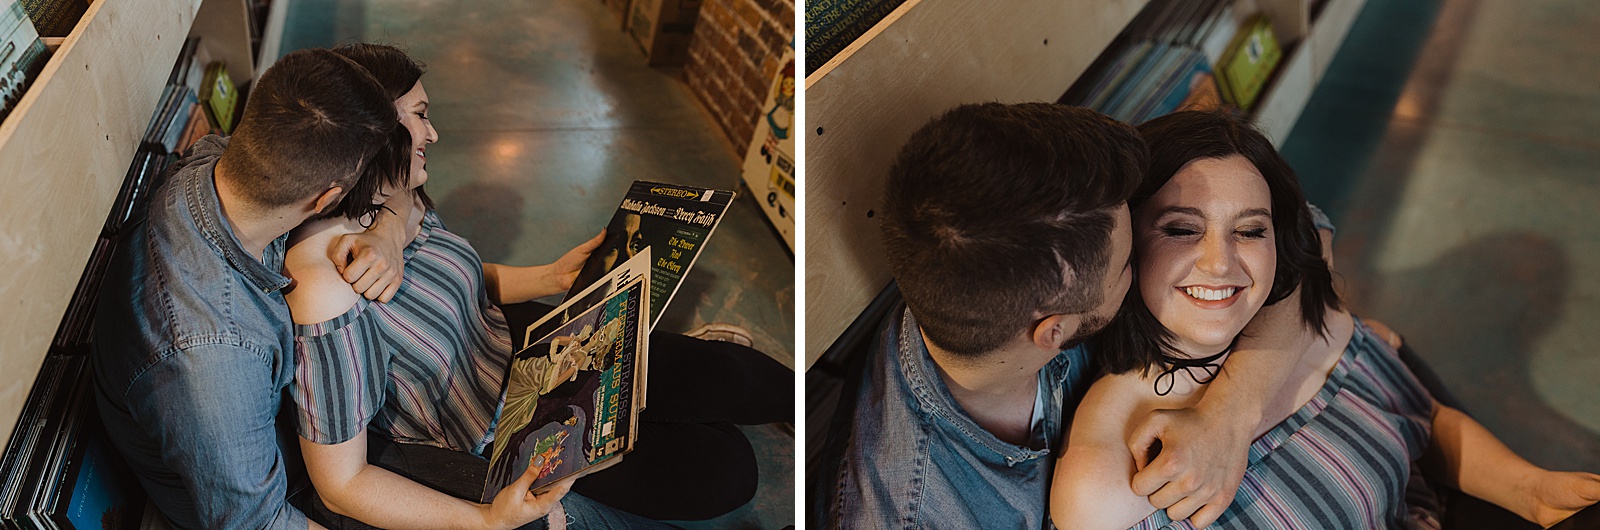 Candid casual non traditional engagement photos at Kansas record store Josey Records by Caitlyn Cloud Photography